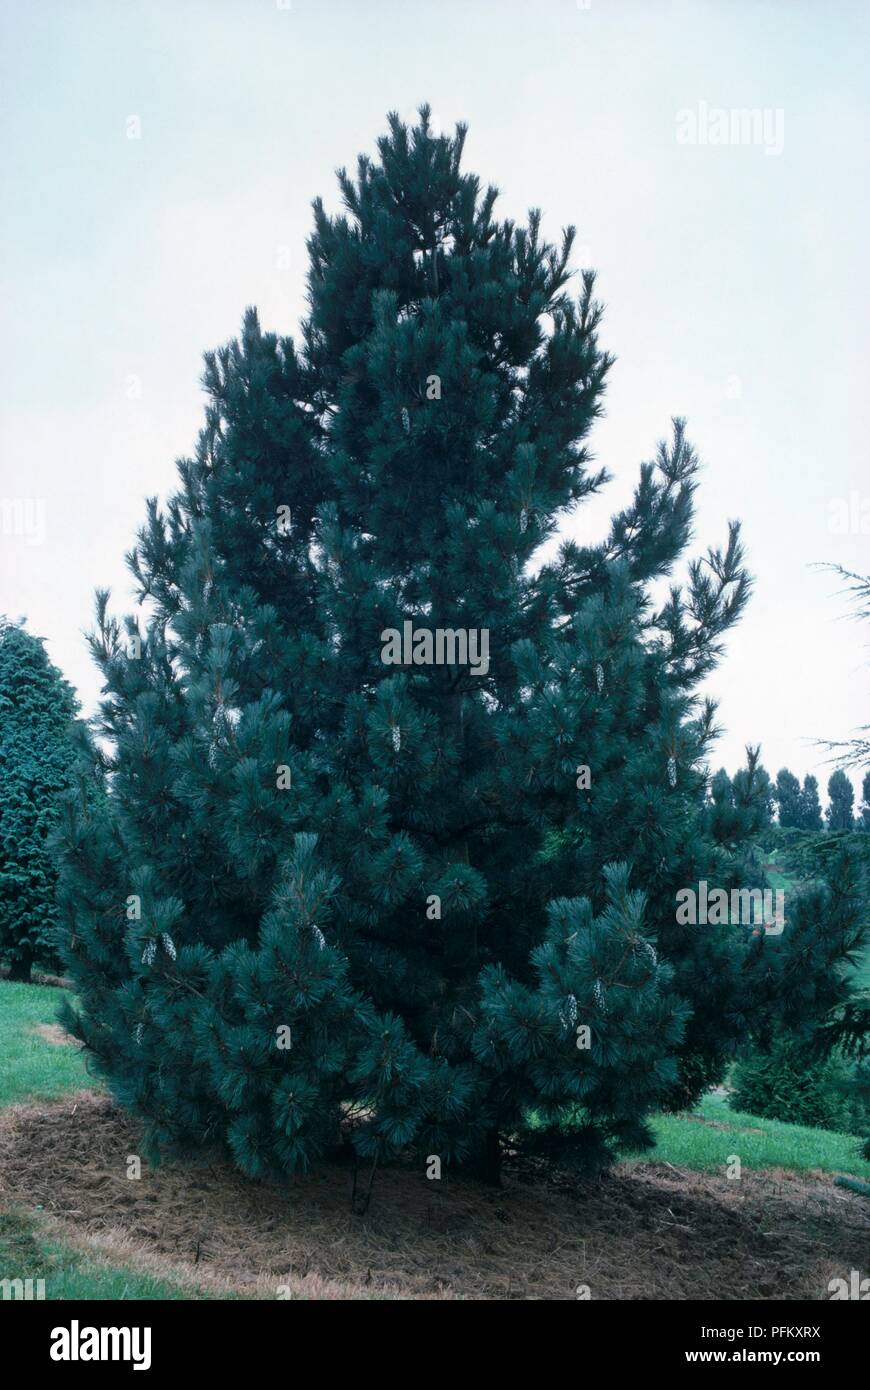 Pinus peuce (Macedonian Pine), upright conifer with dense green leaves, and pinecones Stock Photo